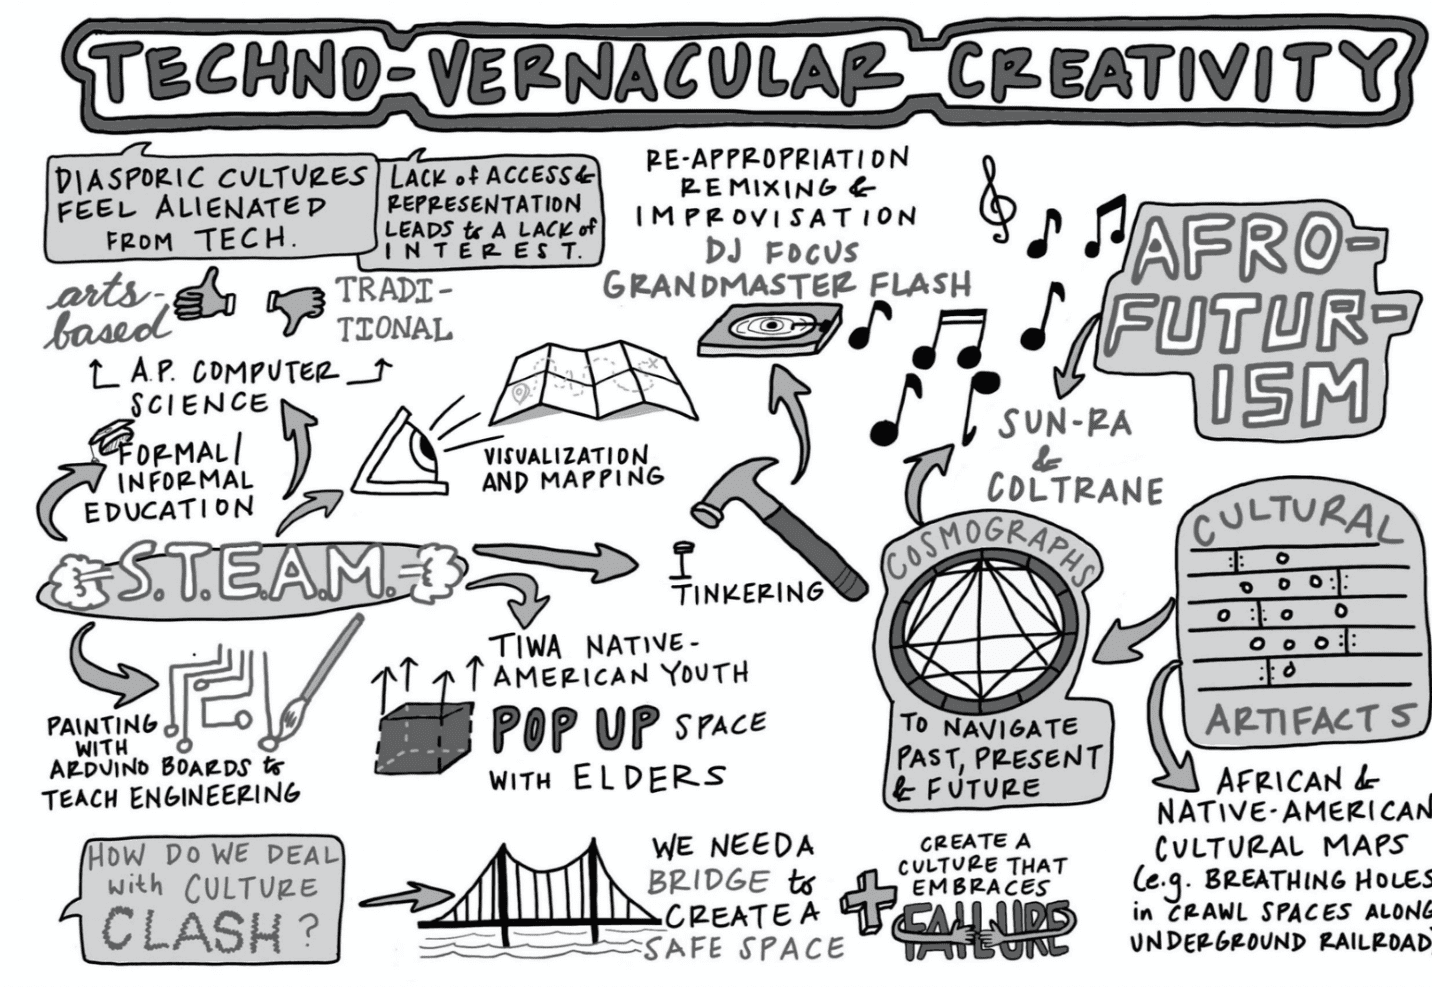 drawing of techno vernacular creativity sayings and items